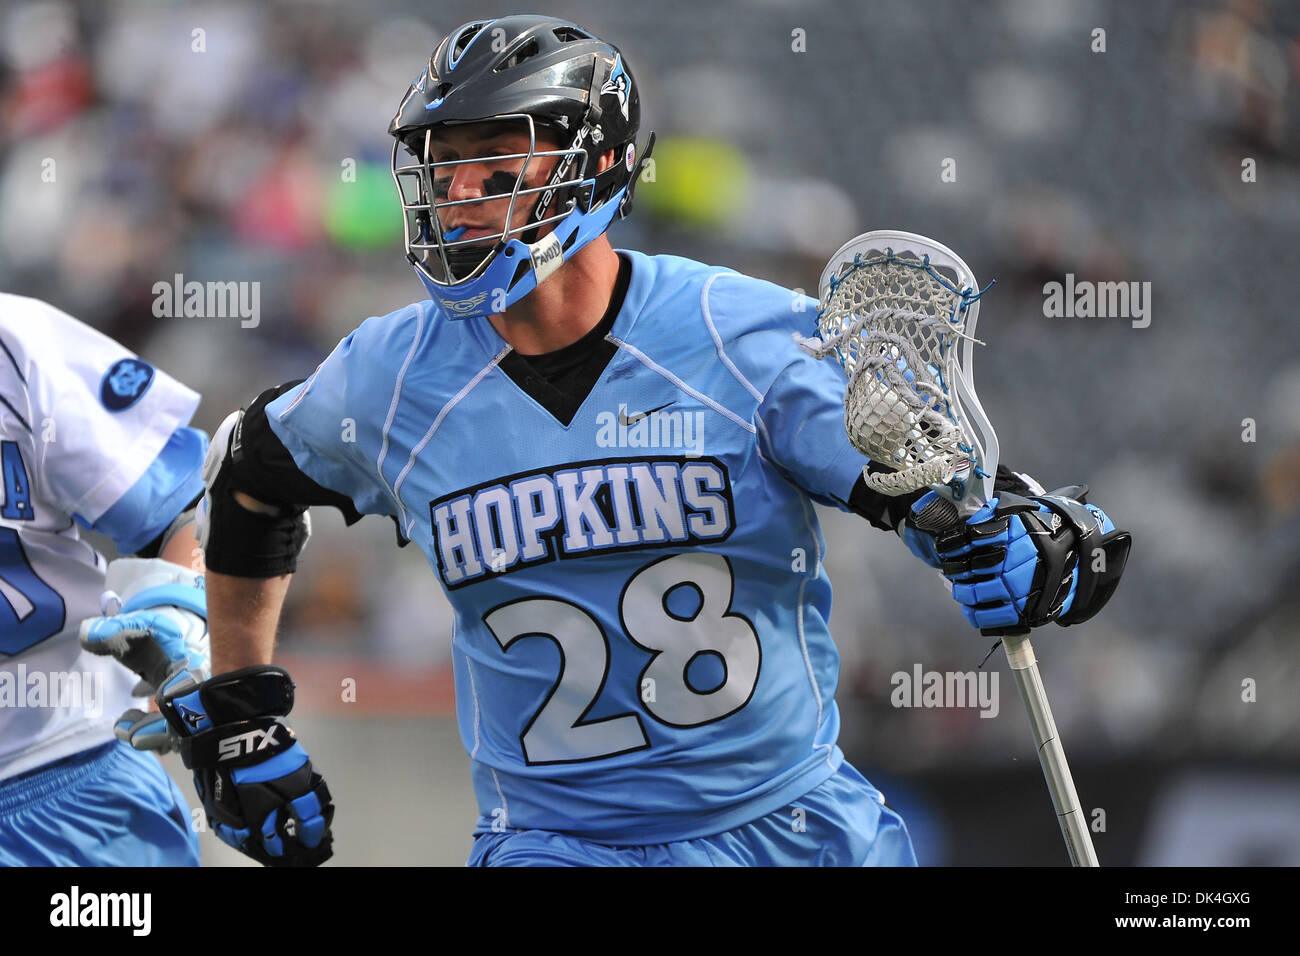 Apr. 3, 2011 - East Rutherford, New Jersey, U.S - Johns Hopkins Blue Jays Midfielder Marshall Burkhart (28) in action during the Konica Minolta Big City Classic at The New Meadowlands Stadium in East Rutherford New Jersey  Johns Hopkins defeats UNC 10 to 9 (Credit Image: © Brooks Von Arx/Southcreek Global/ZUMAPRESS.com) Stock Photo